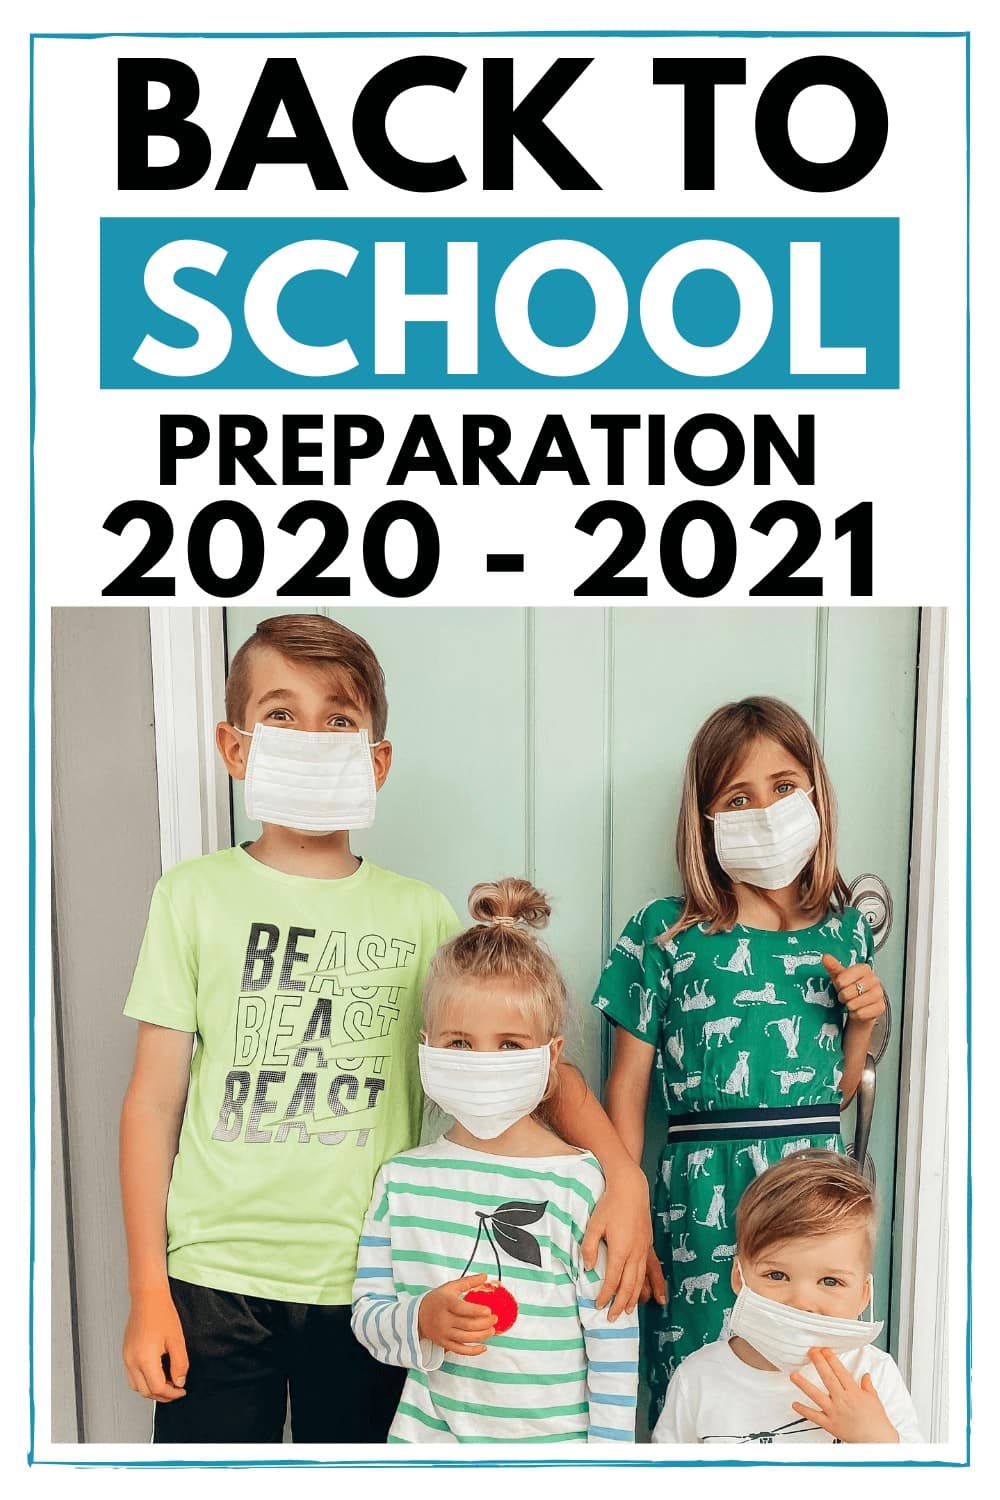 Back to School 2020: Sending Kids to School During Pandemic for 2020 - 2021 School Year. 